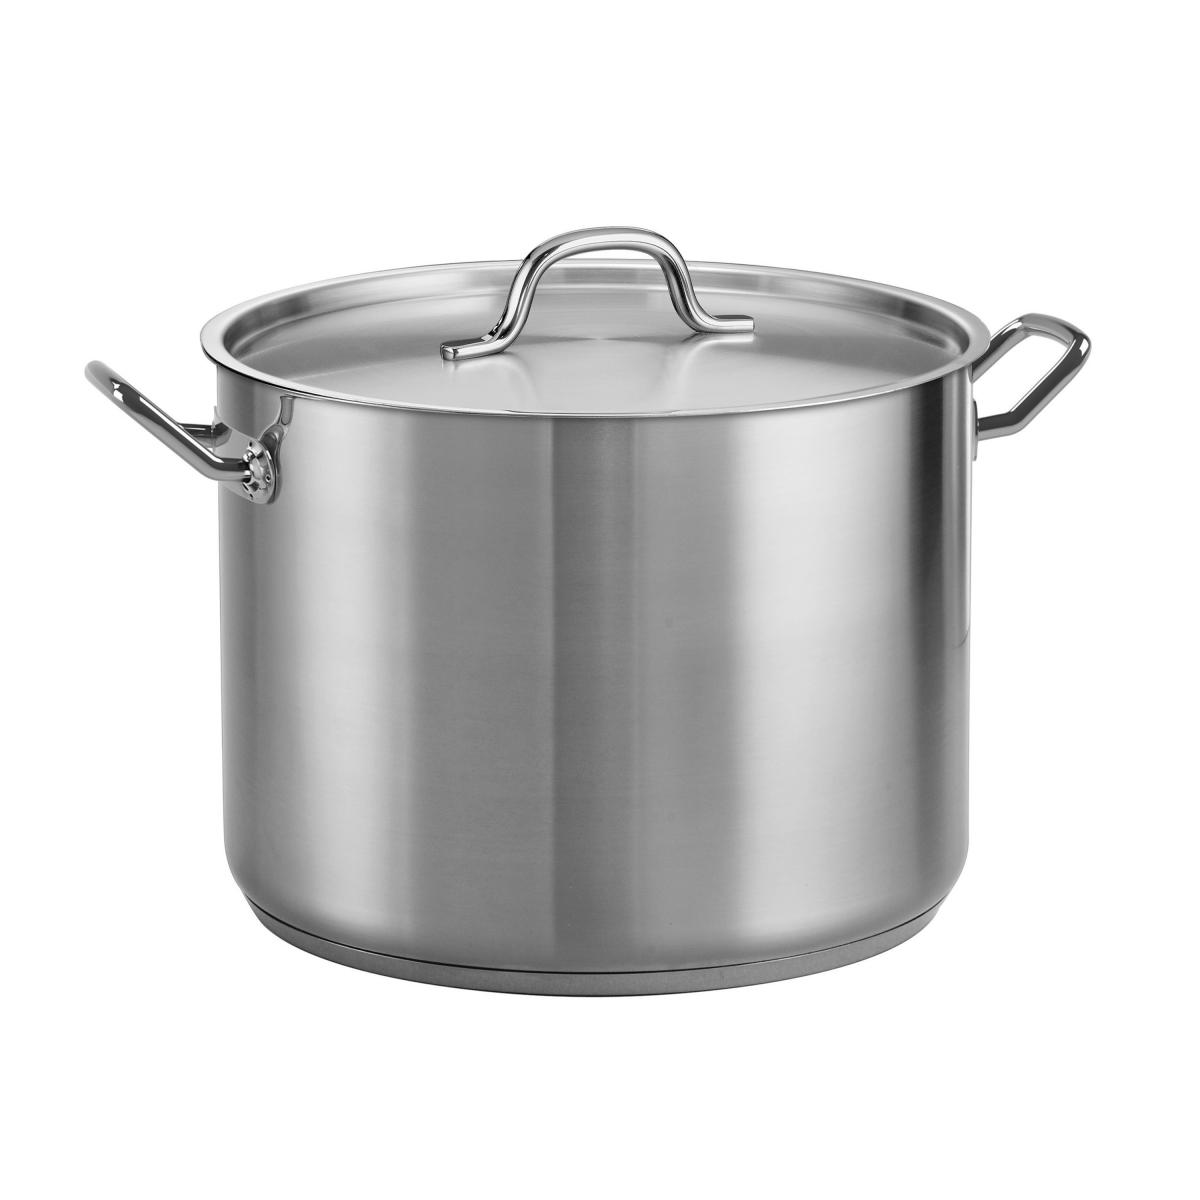 Tramontina Stainless Steel 16qt Stock Pot